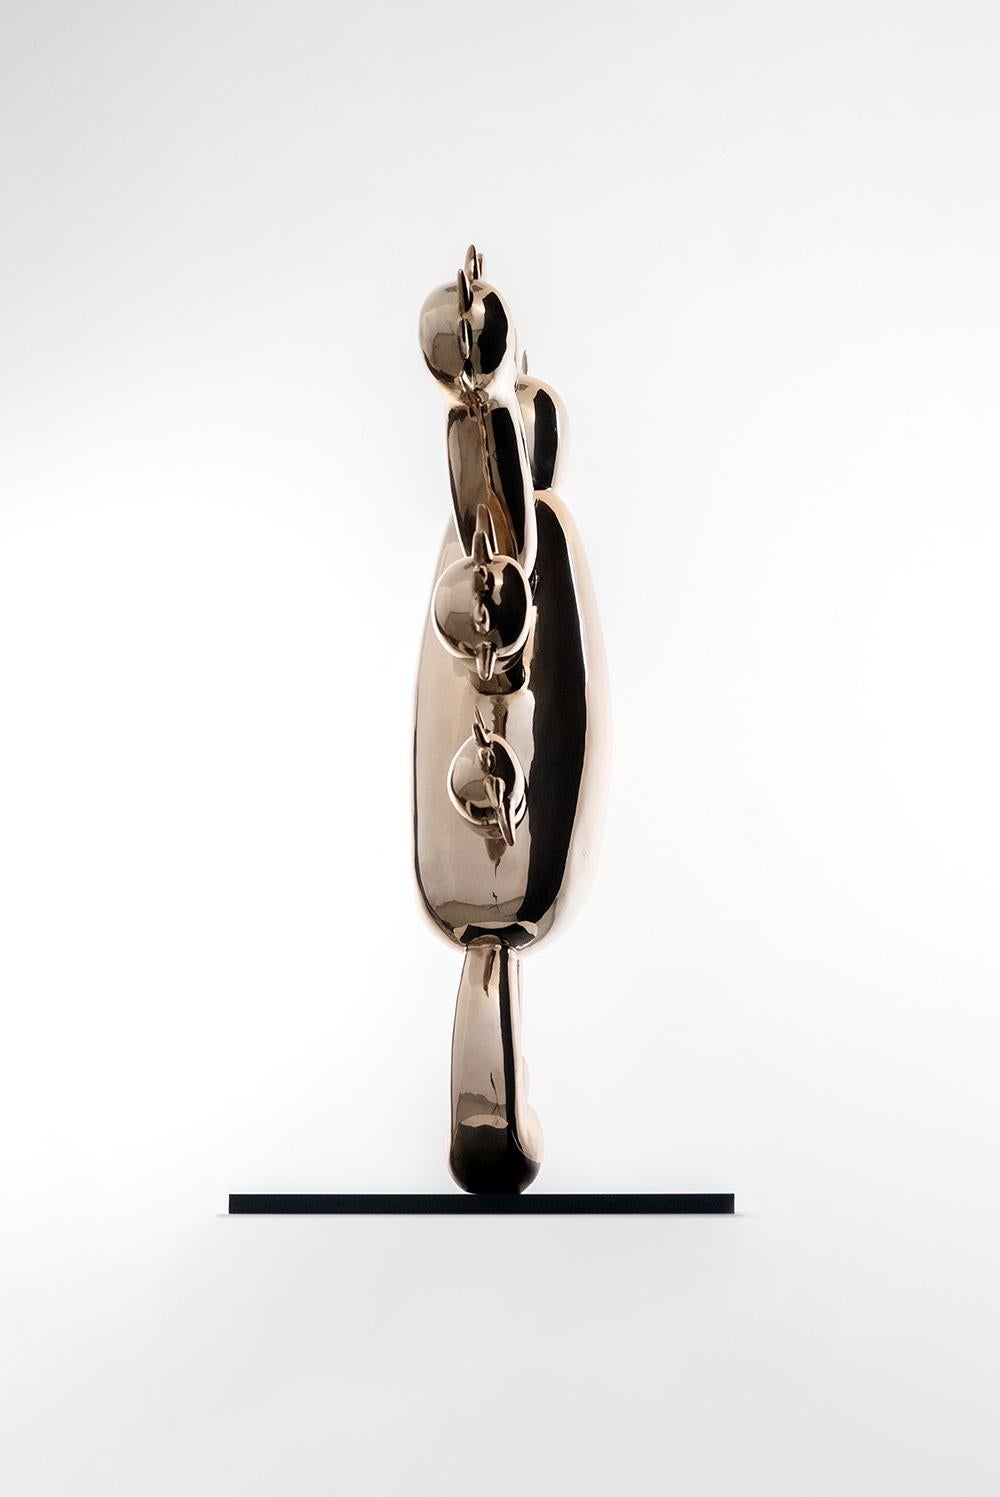 Luzar is a polished bronze sculpture by contemporary artist Marcelo Martin Burgos, dimensions are 100 × 86 × 20 cm (39.4 × 33.9 × 7.9 in). 
The sculpture is signed and numbered, it is part of a limited edition of 12 editions, and comes with a